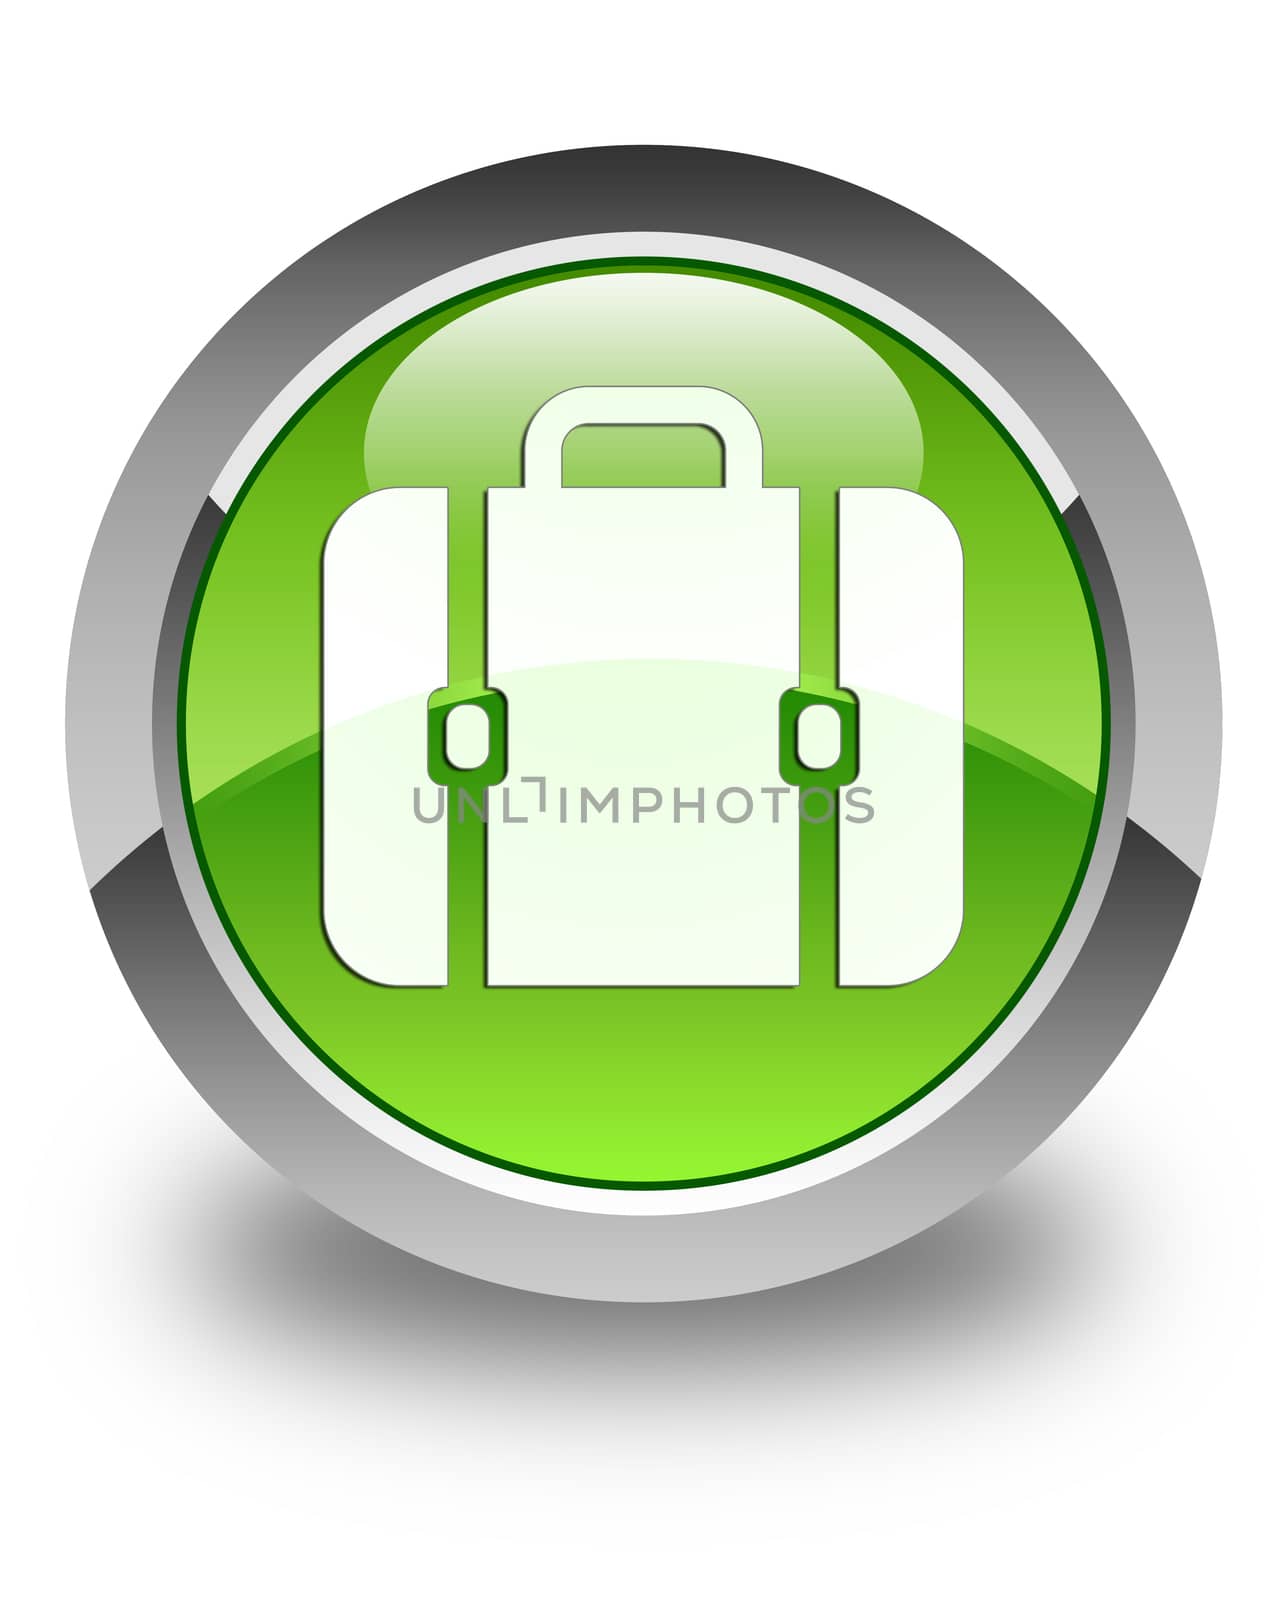 Financial bag icon on glossy green round button